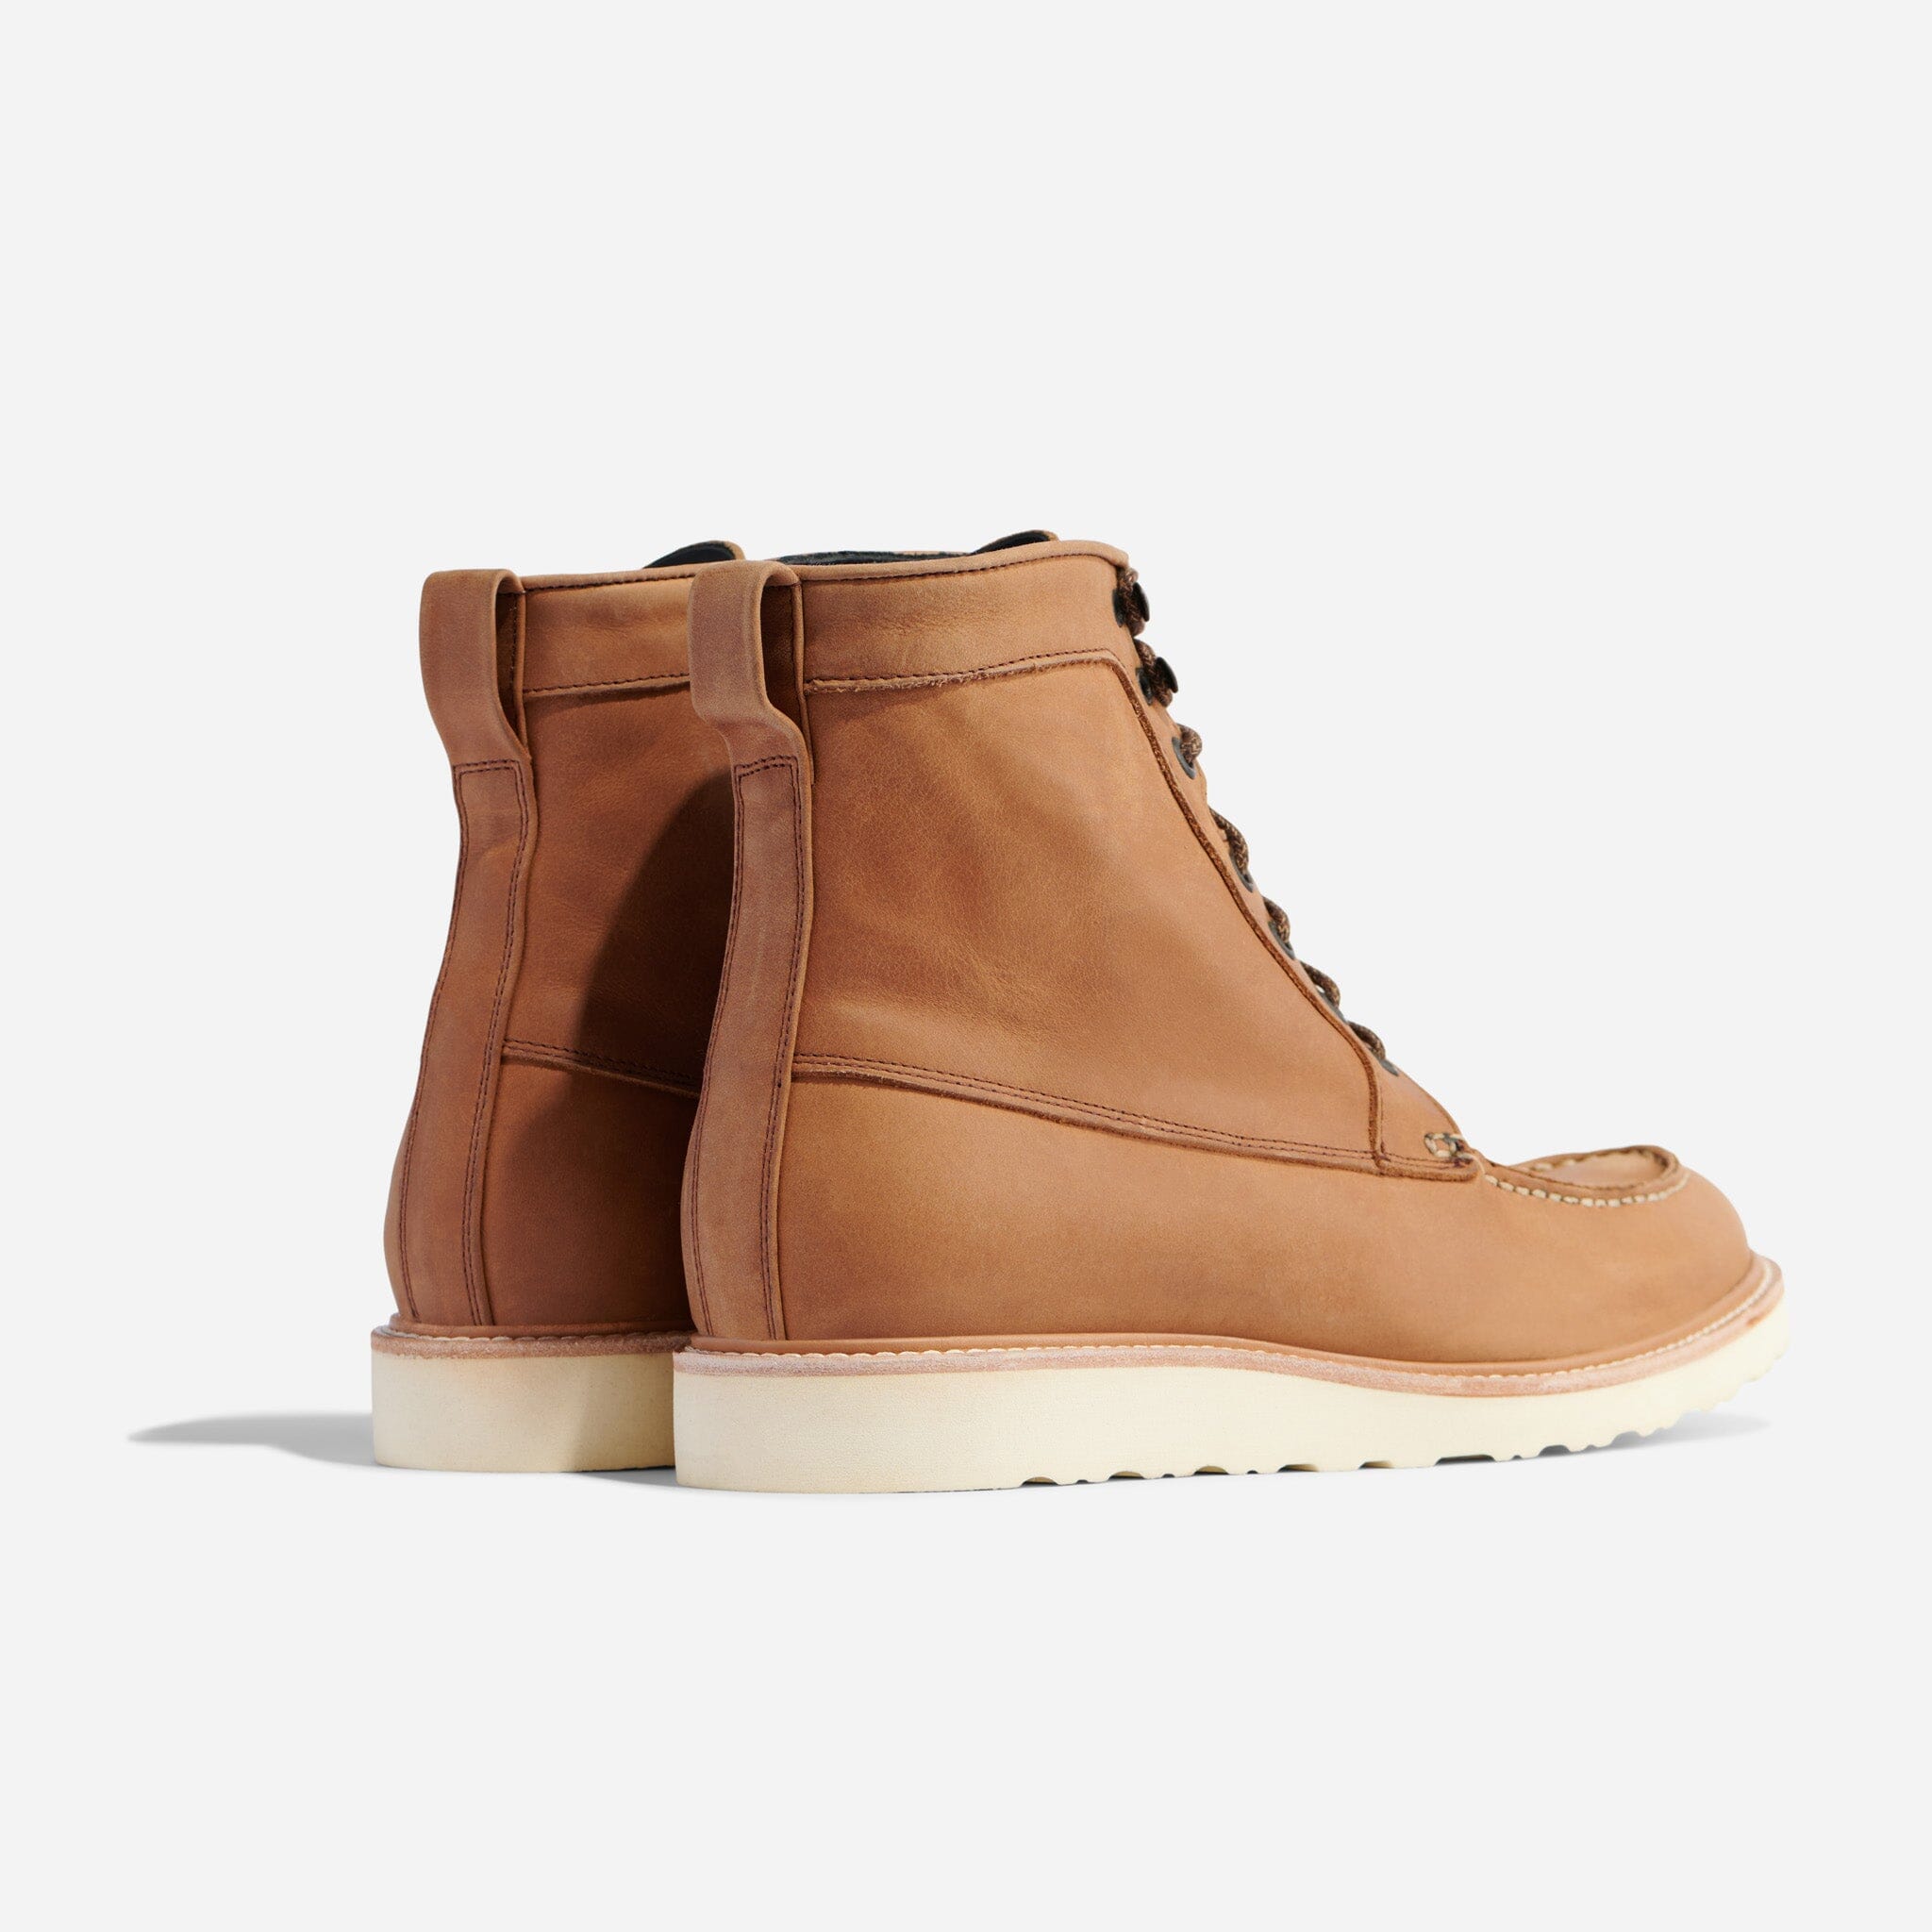 All-Weather Mateo Tobacco Boot